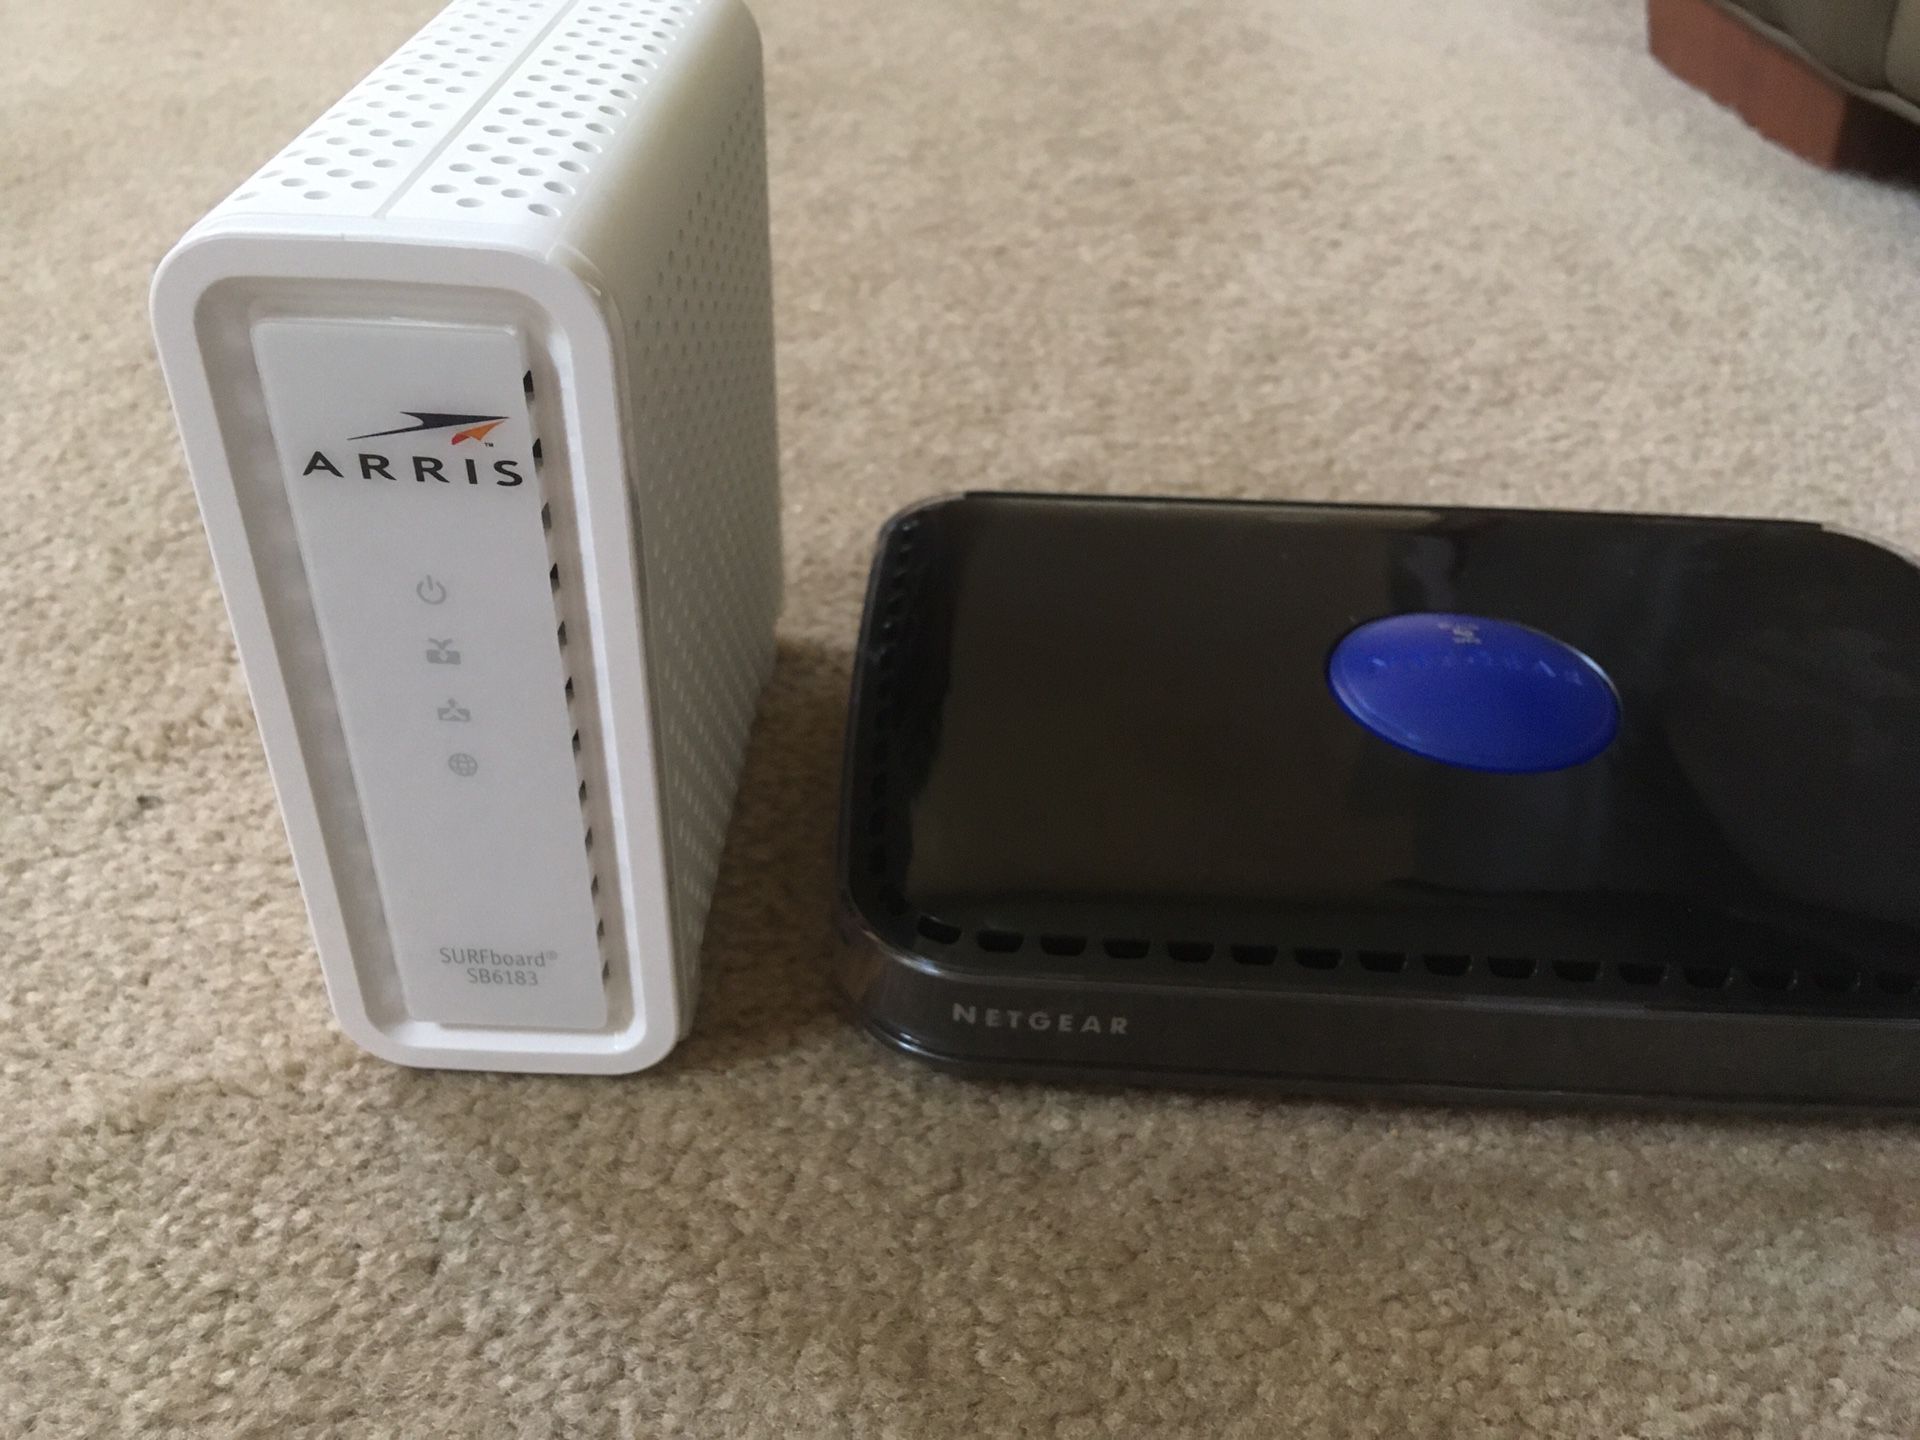 Arris Modem and Netgear Router for Xfinity